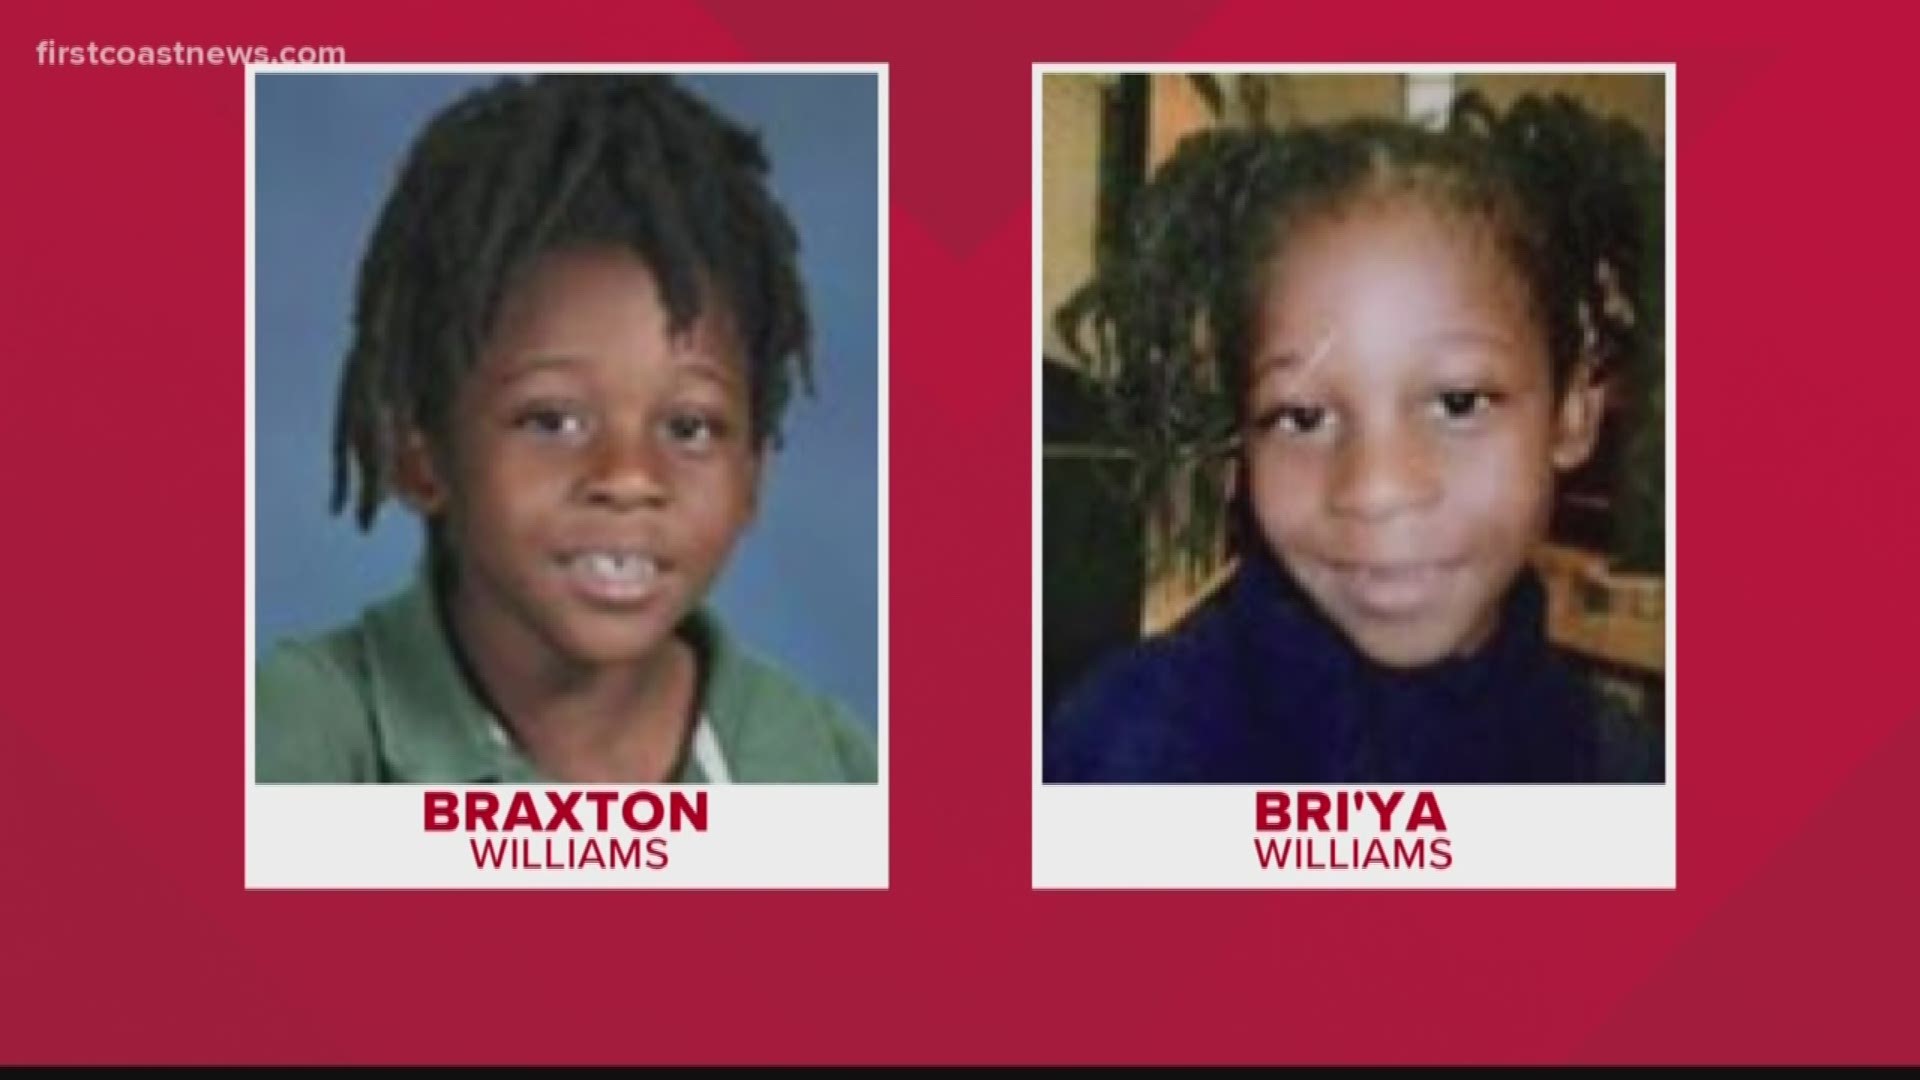 JSO said it is looking for a white four-door vehicle that is playing loud children's music. It was seen in the neighborhood where Braxton & Bri'ya Williams live.